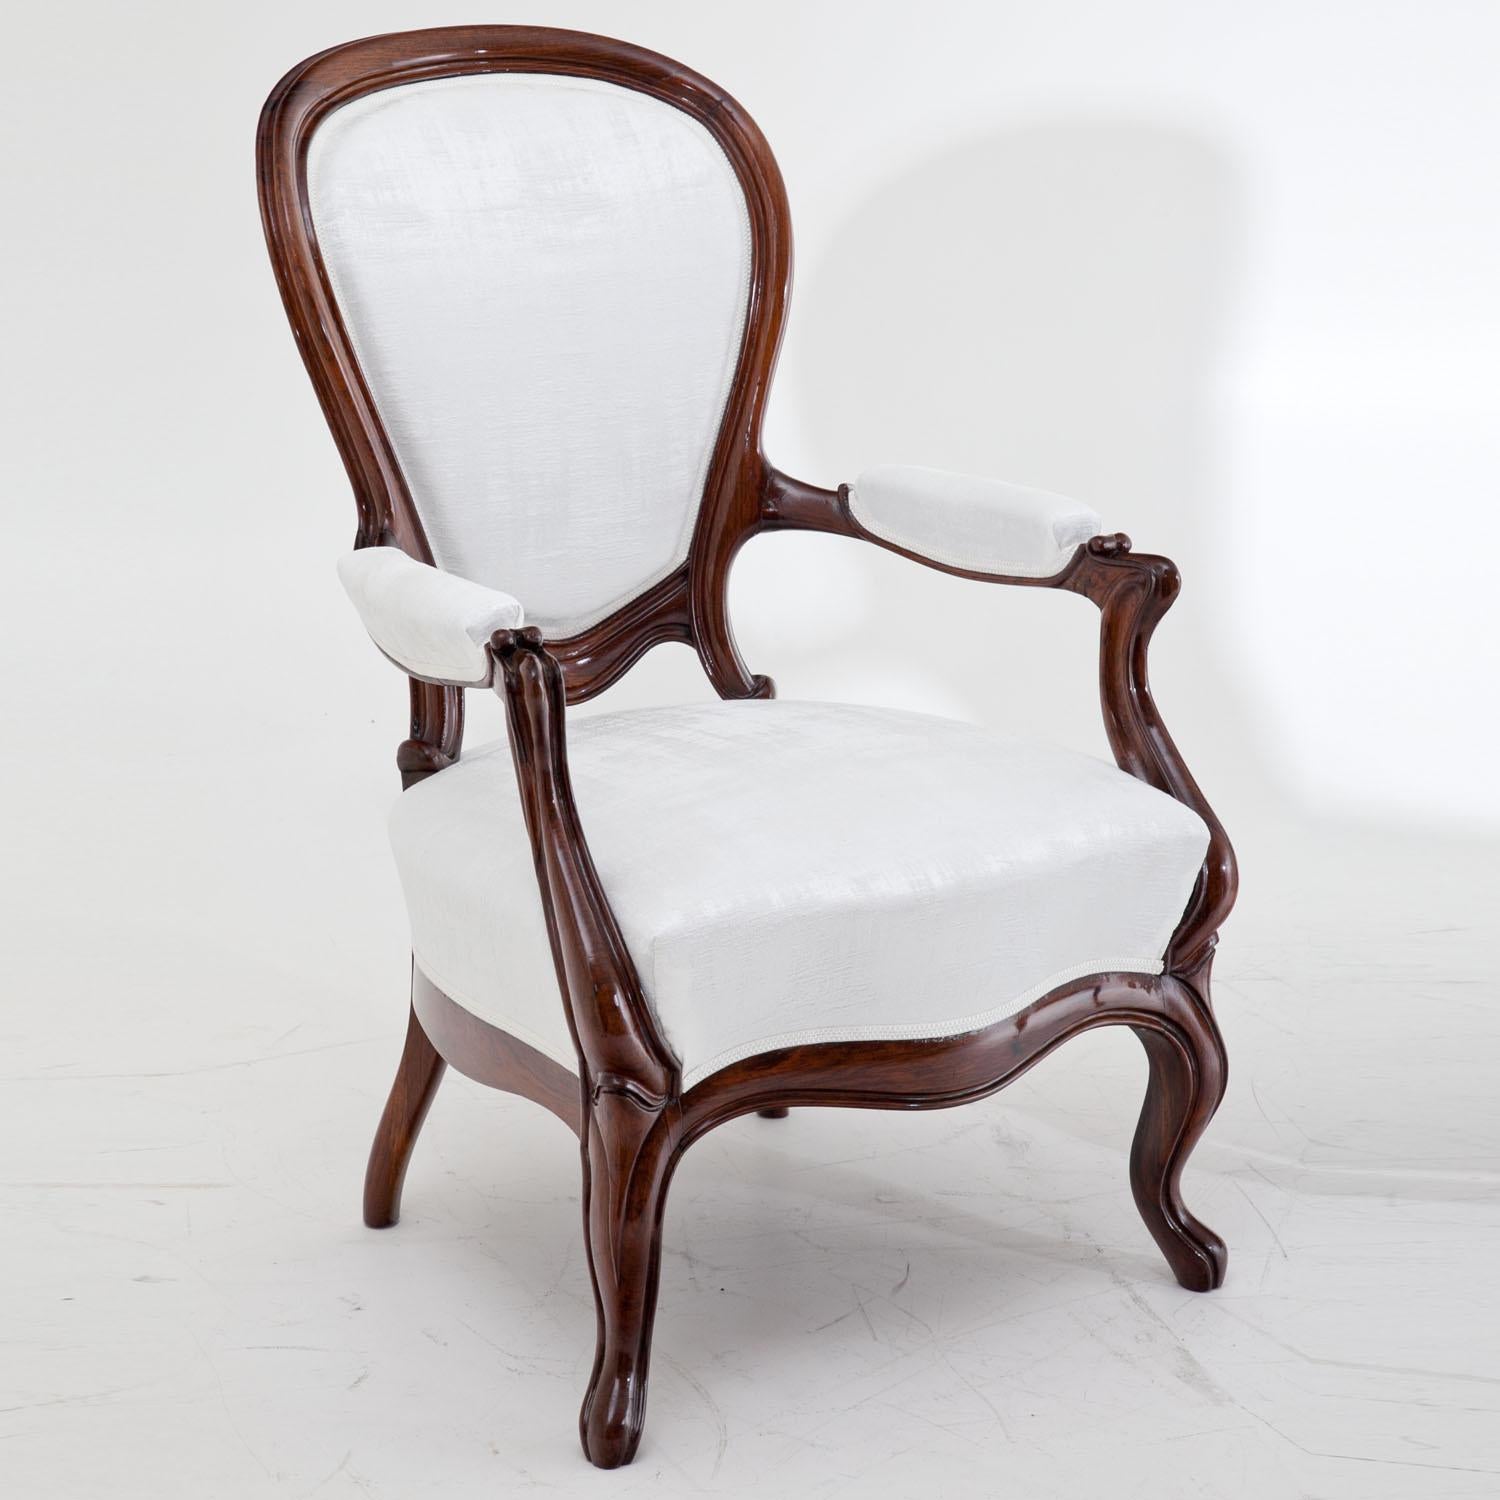 Pair of Louis Philippe armchairs on s-shaped legs with a curved front rail and armrests as well as cushioned seats, backrests and armrests. The chairs were reupholstered with a white slightly structured, high quality fabric.